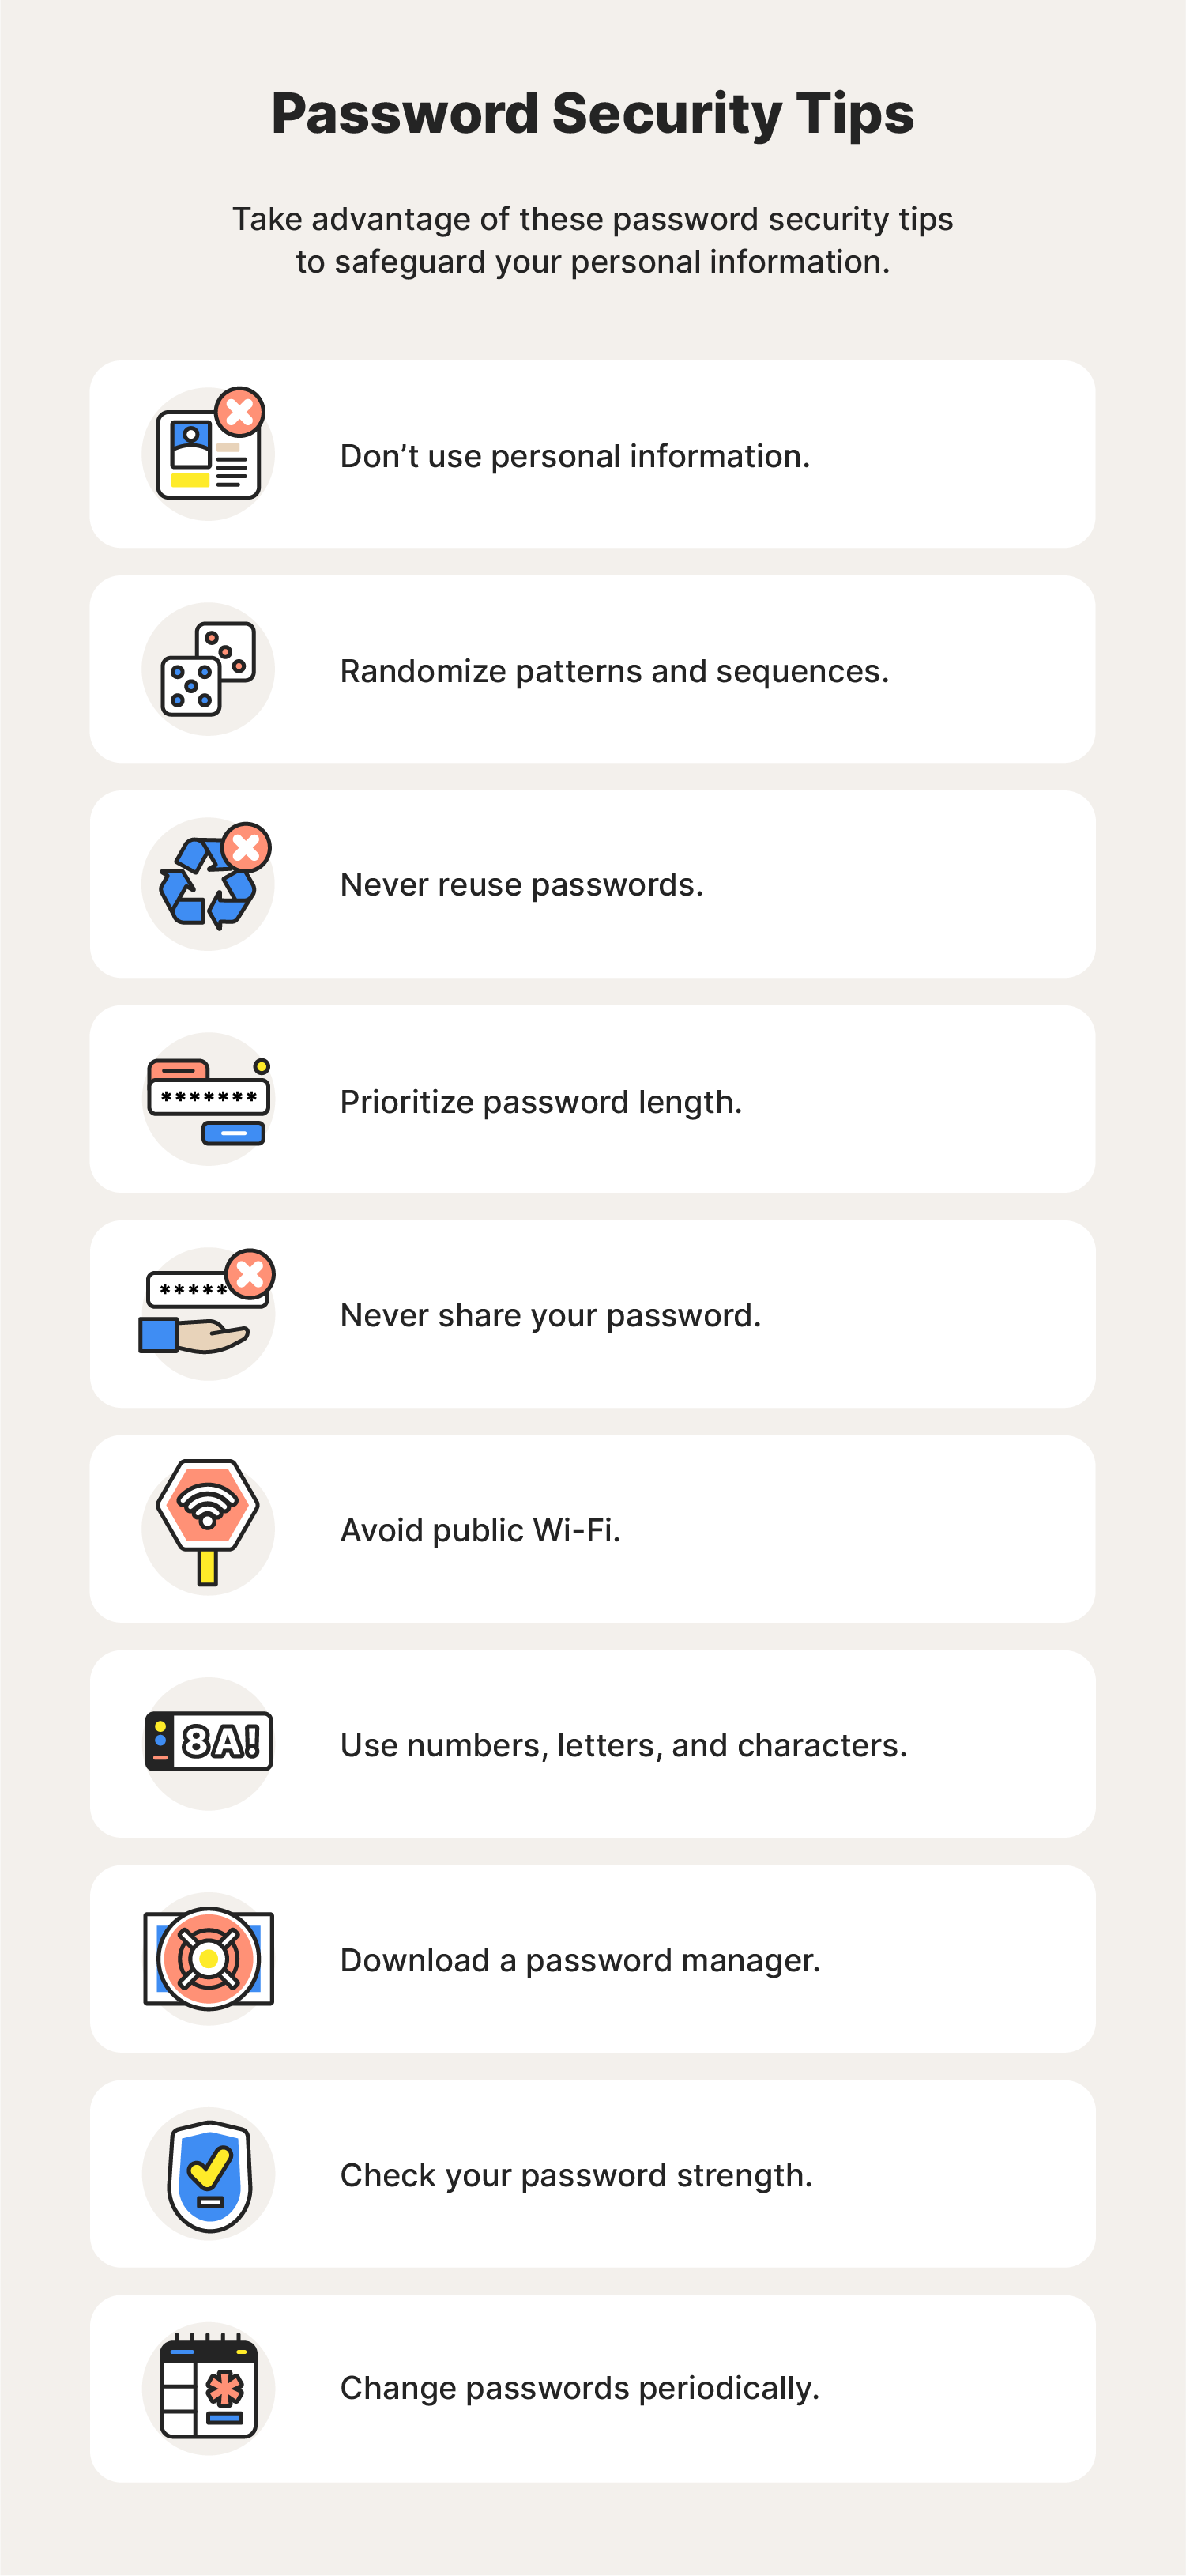 Ten illustrations accompany password security tips that can help people protect themselves from cybersecurity threats.